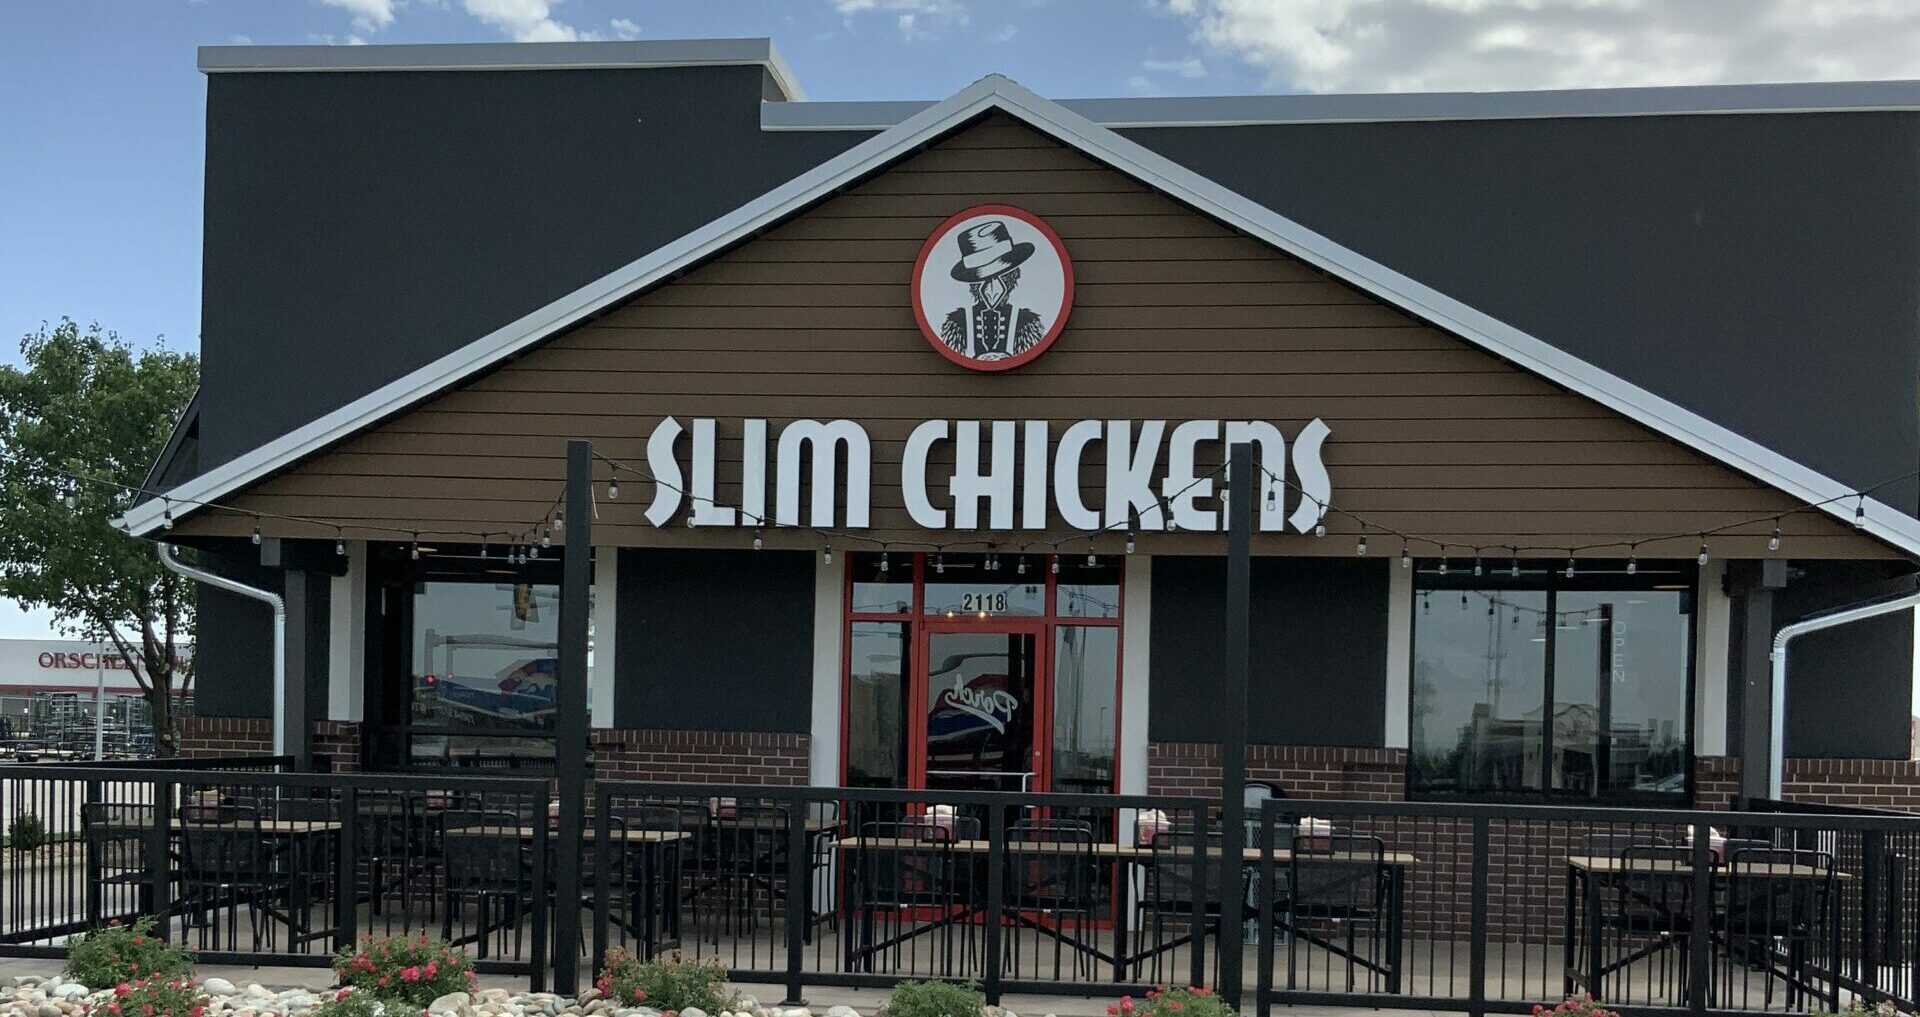 TAKE A SNEAK PEAK INSIDE THE NEWLY COMPLETED SLIM CHICKENS IN MCPHERSON, KS!